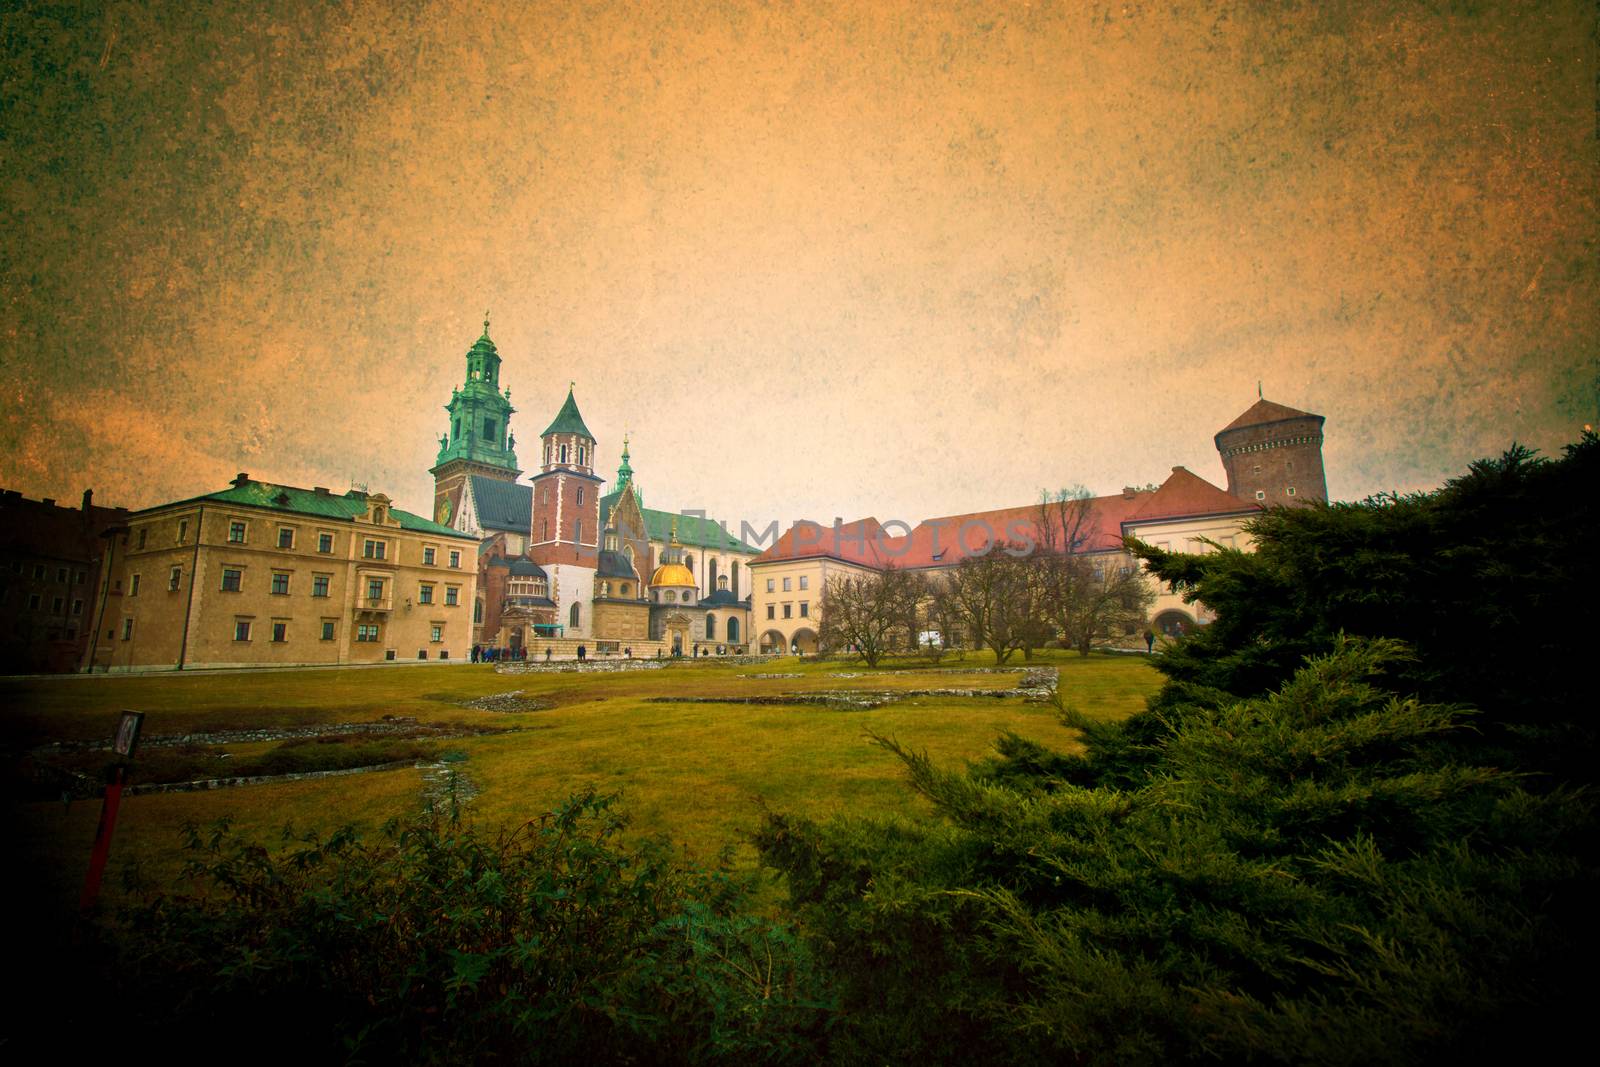 View of Wawel Castle in Cracow, Poland. Retro vintage, grunge style.